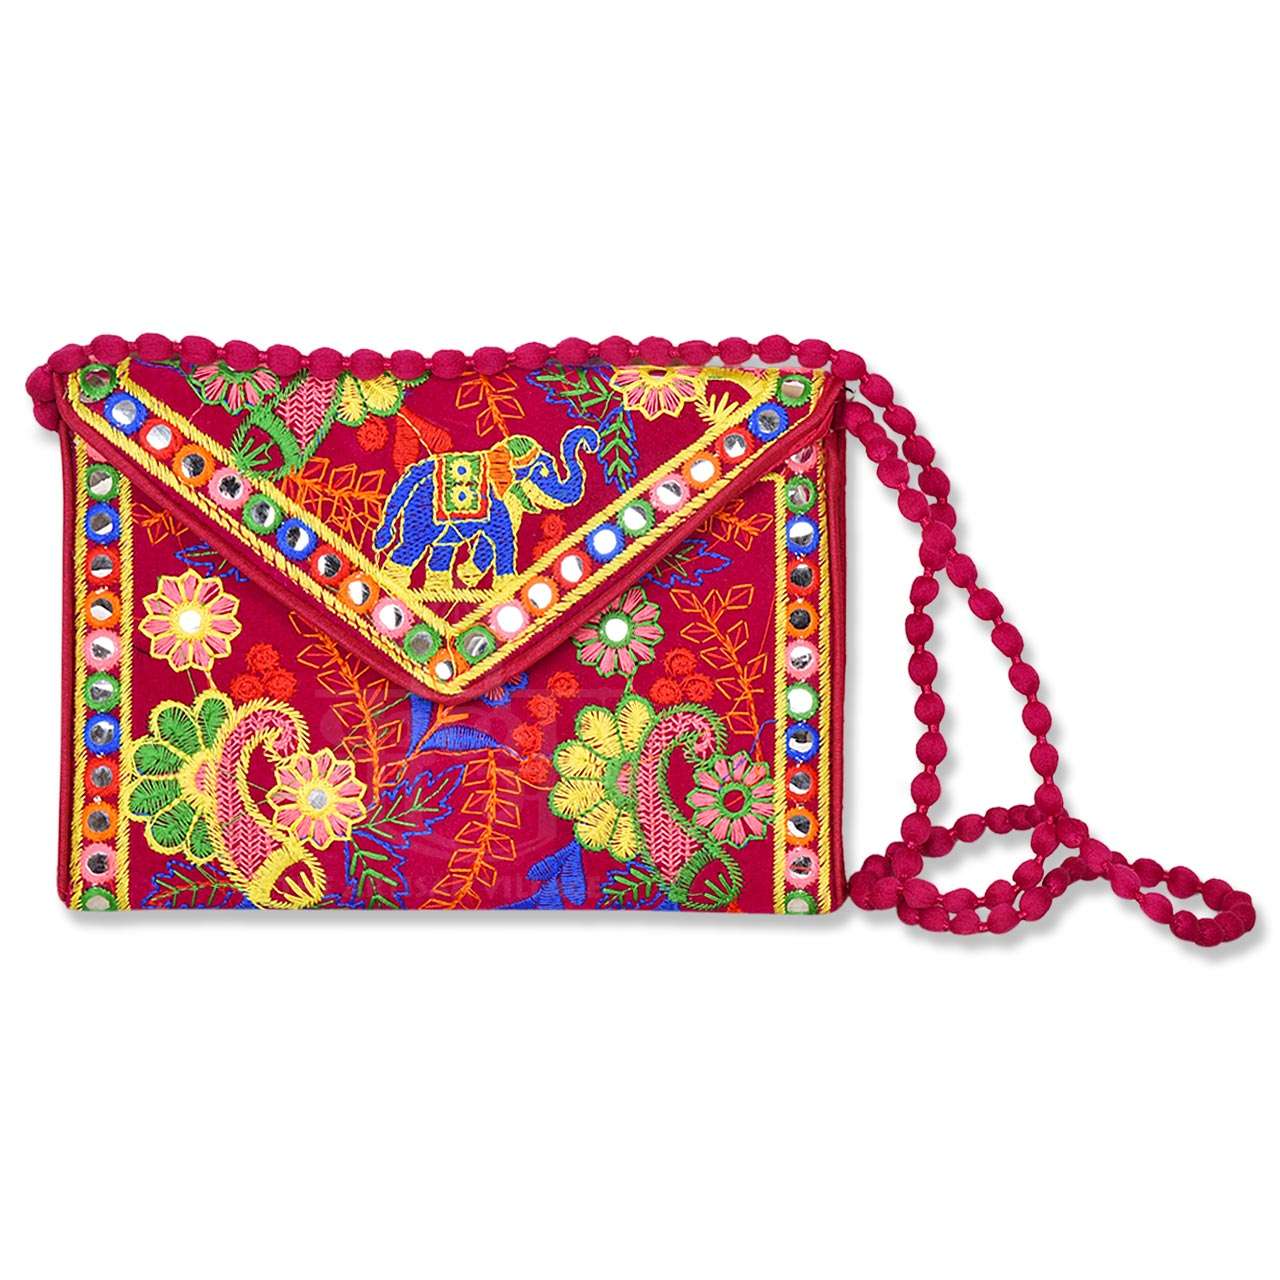 How to buy authentic handmade Rajasthani Potli Bags online?